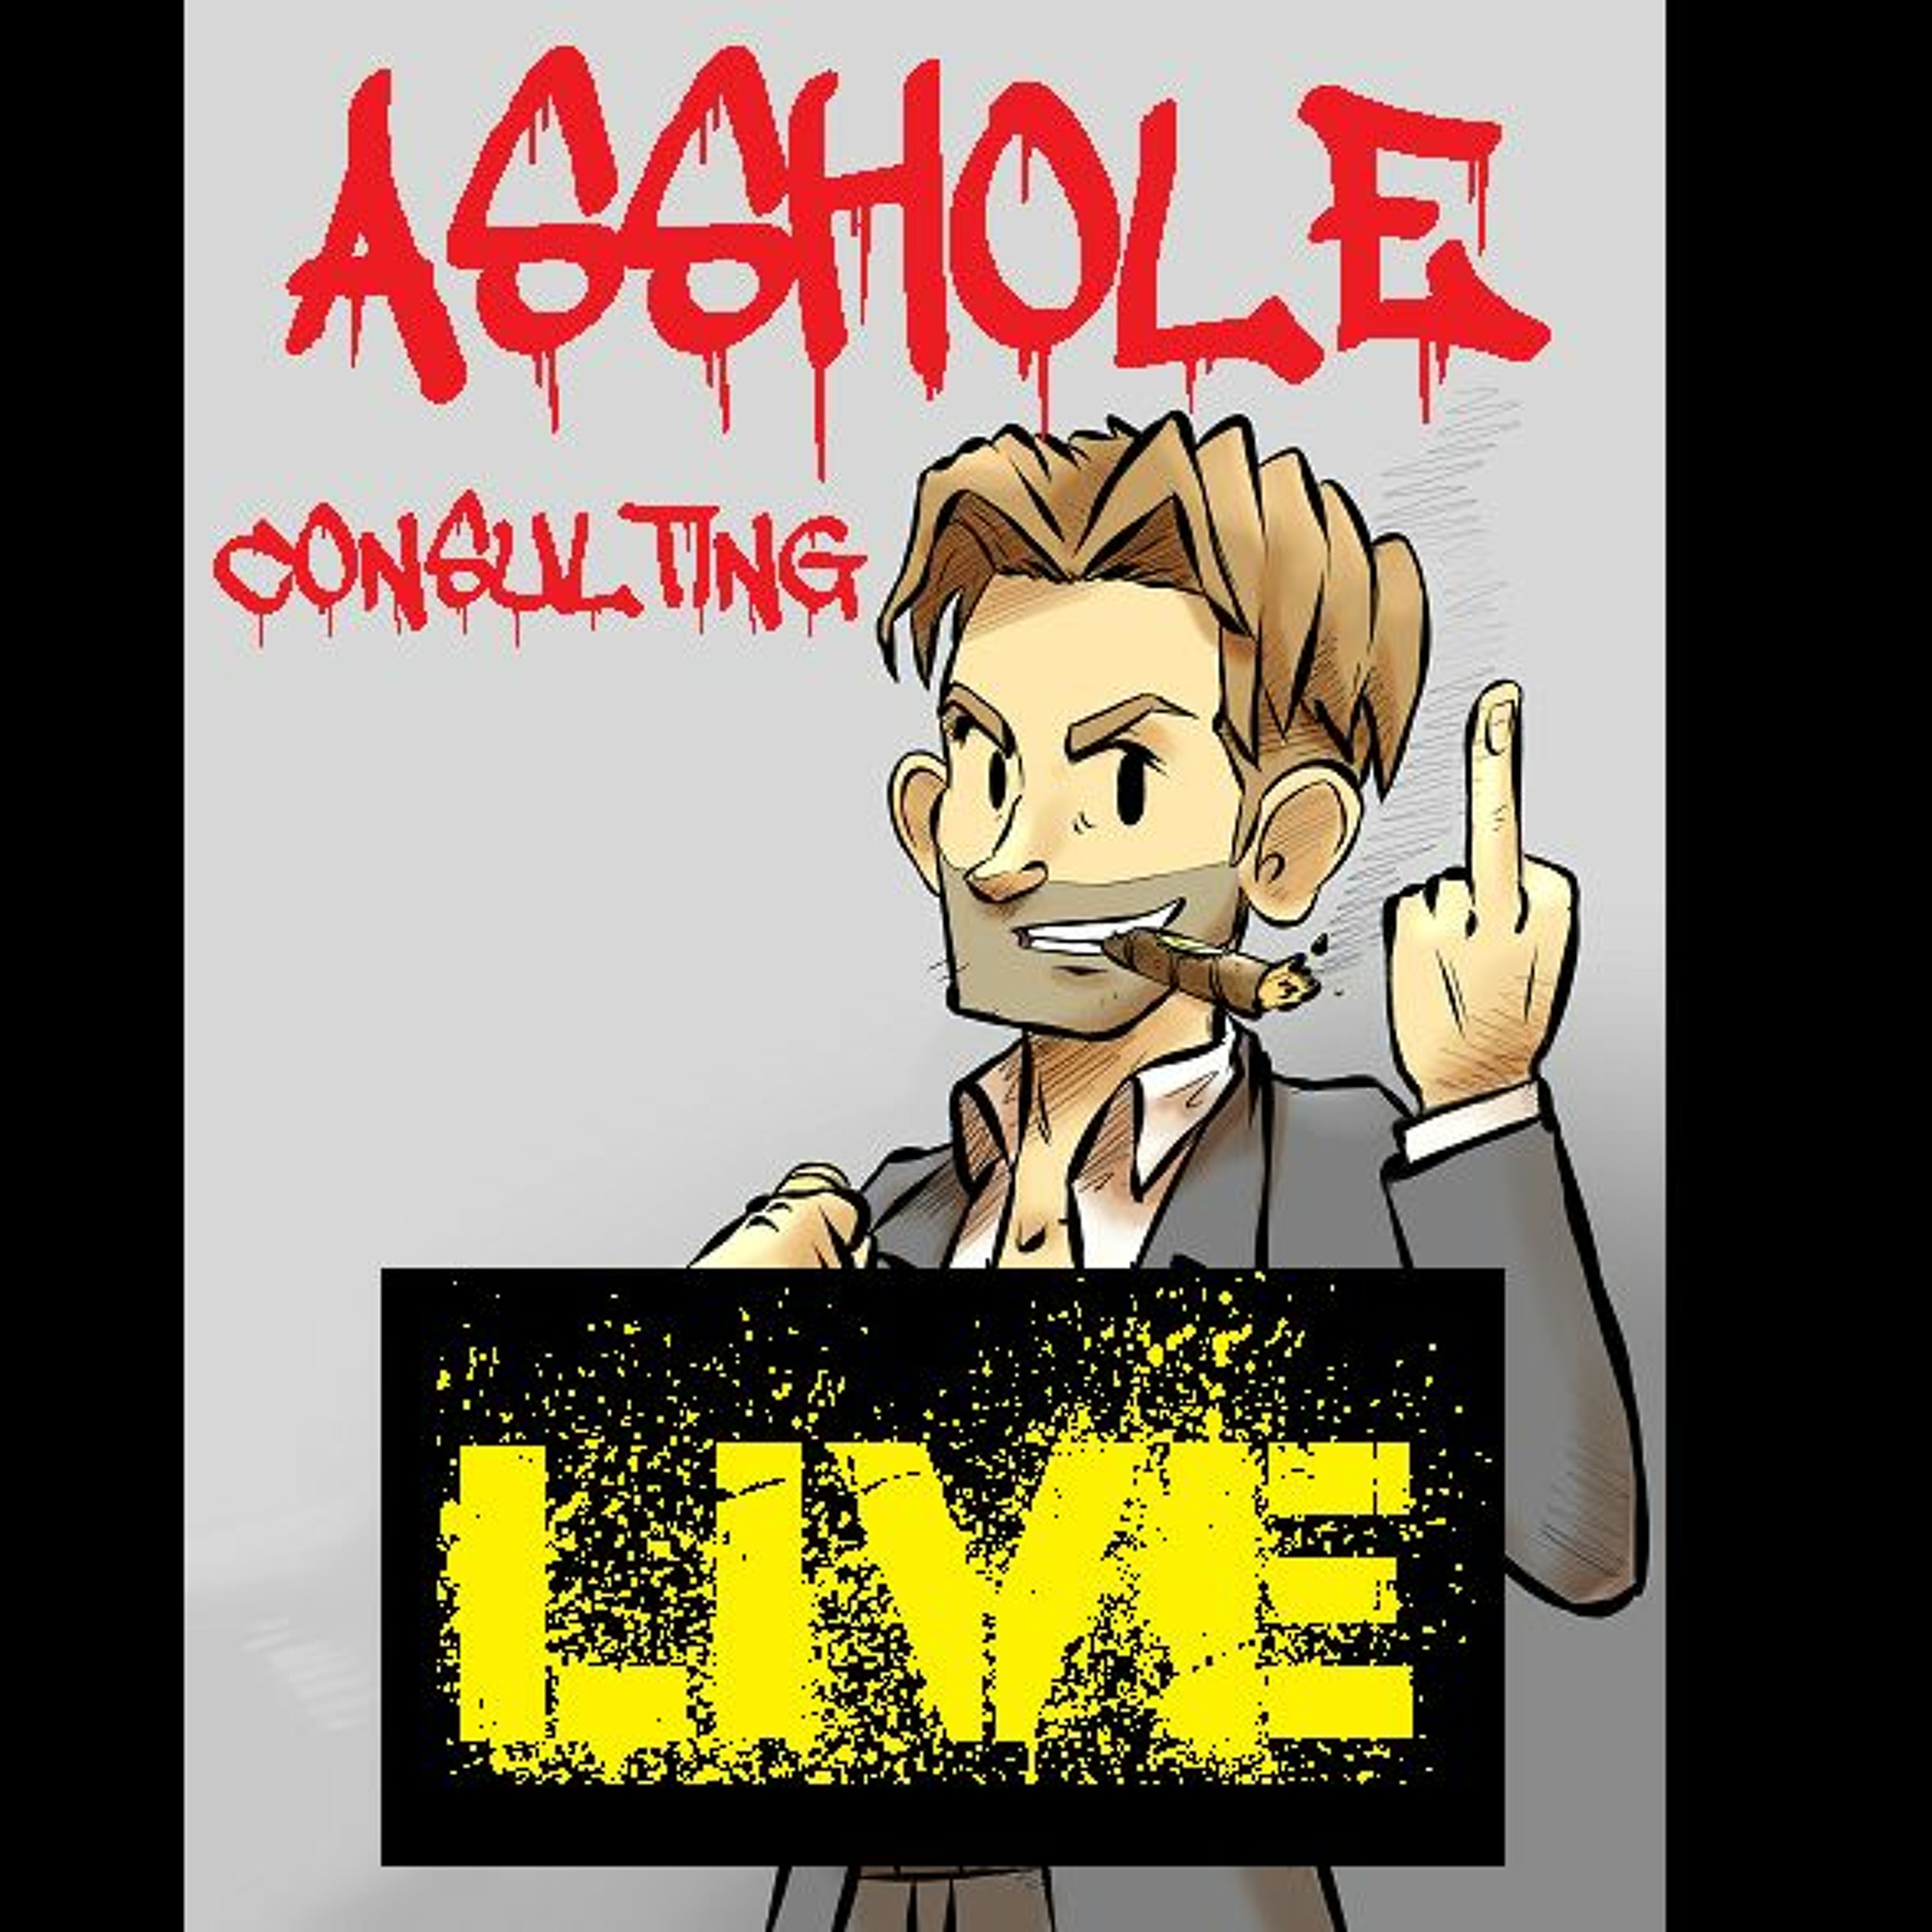 Asshole Consulting Live #2